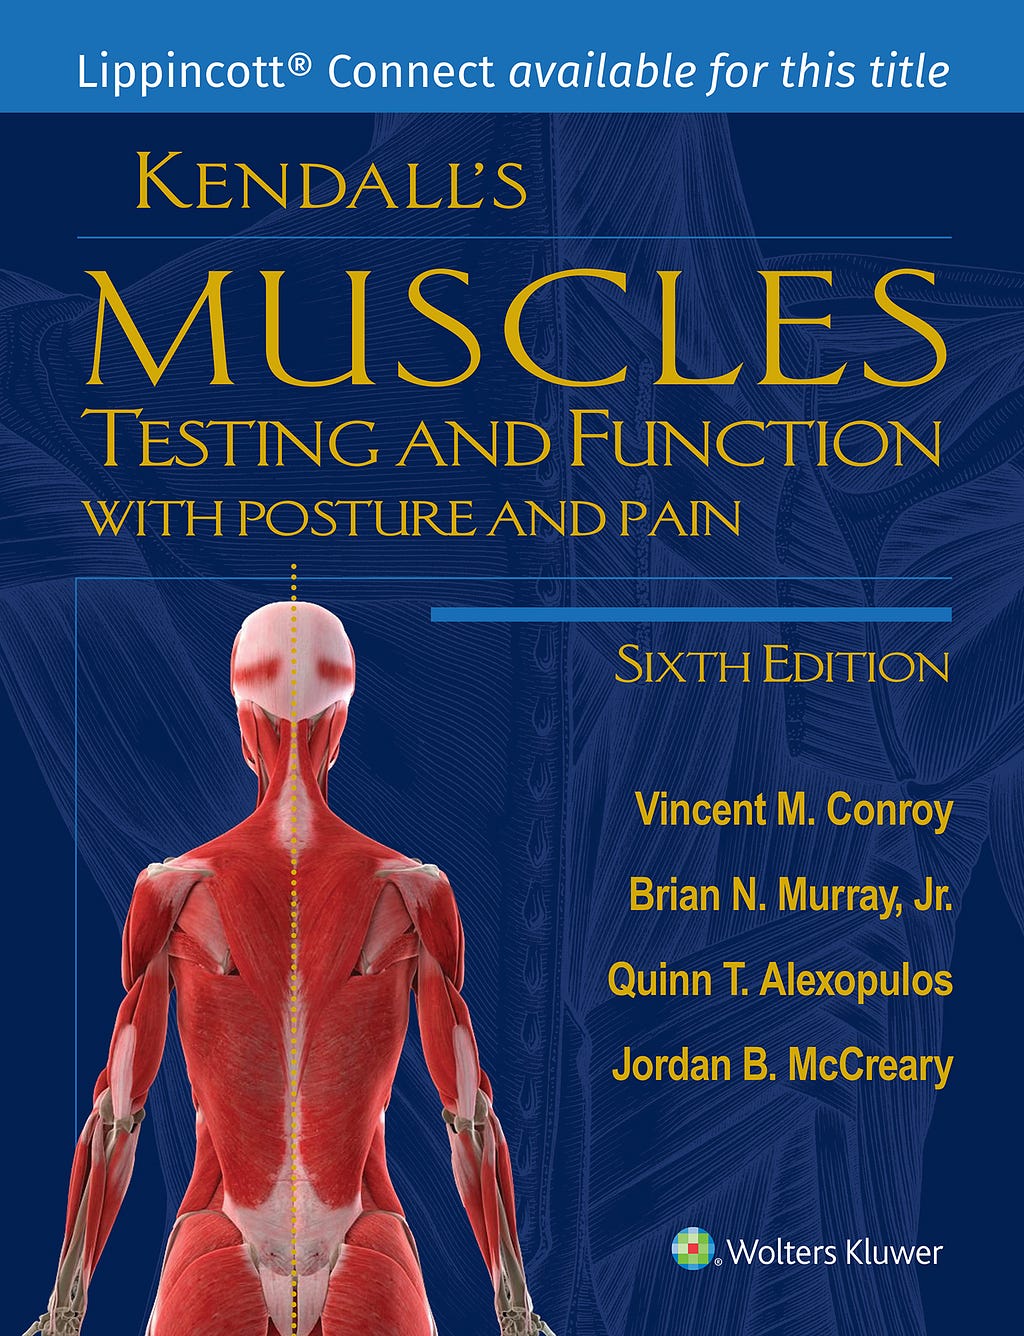 Kendall's Muscles: Testing and Function with Posture and Pain PDF